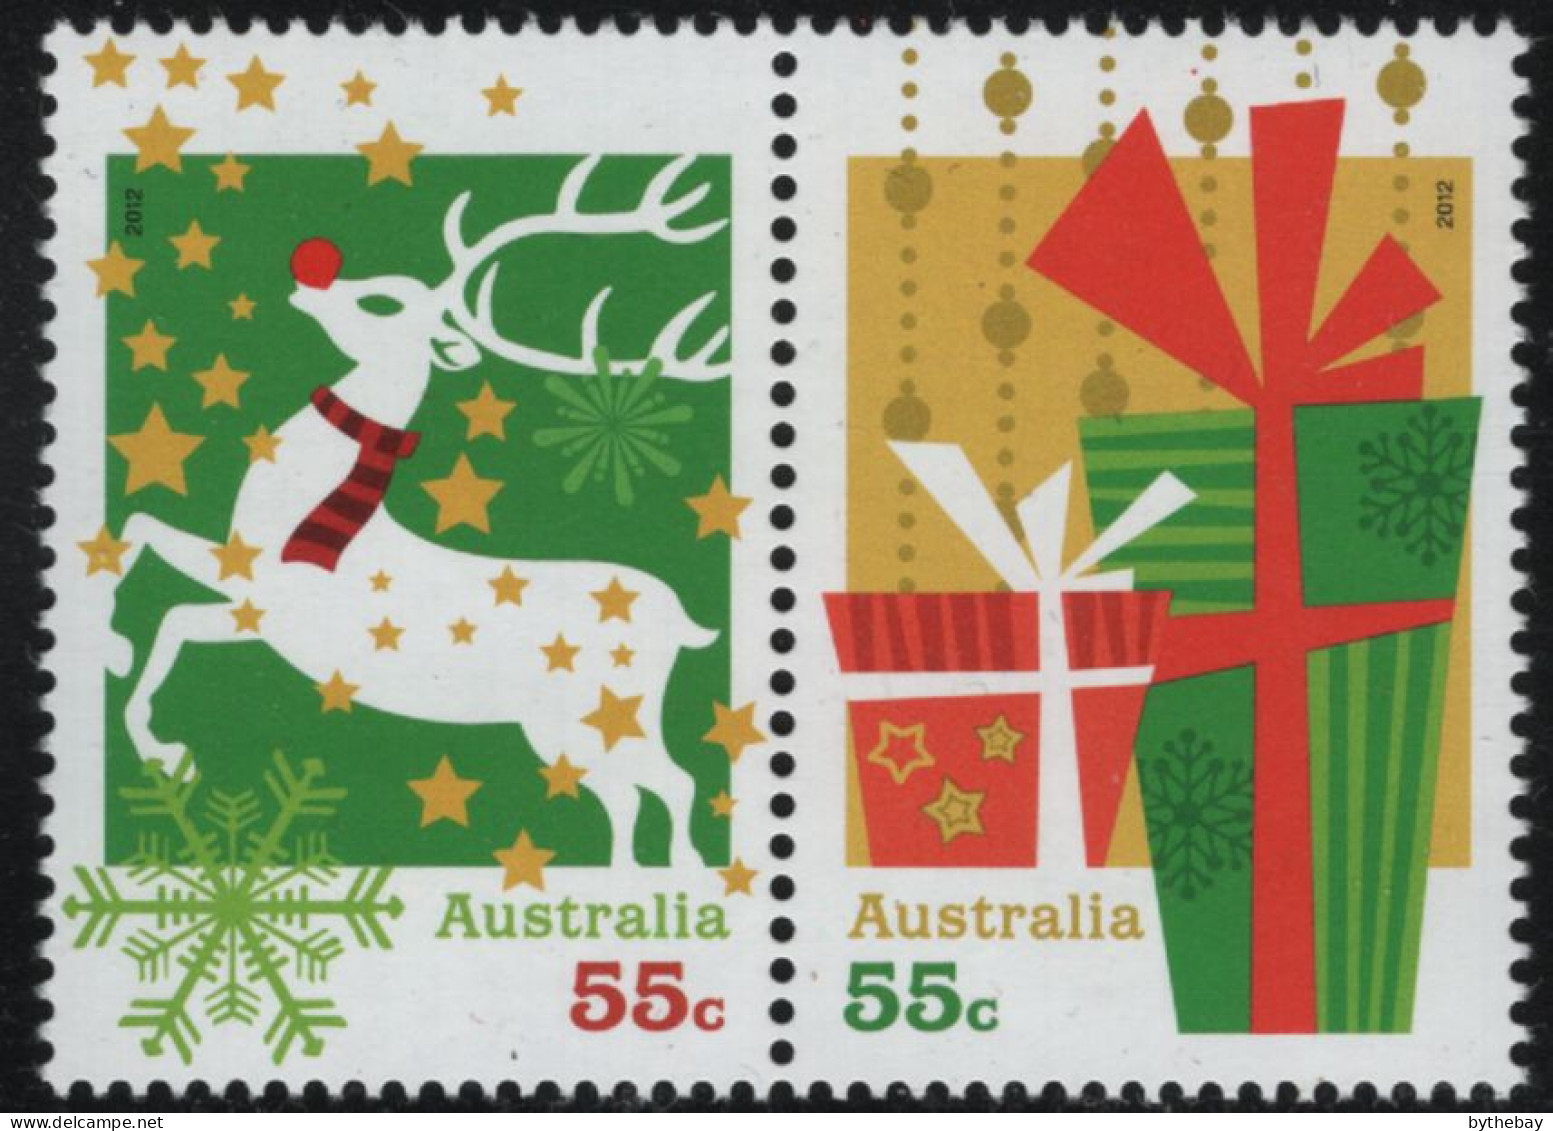 Australia 2012 MNH Sc 3807-3808 55c Reindeer, Gifts Christmas Pair - Mint Stamps